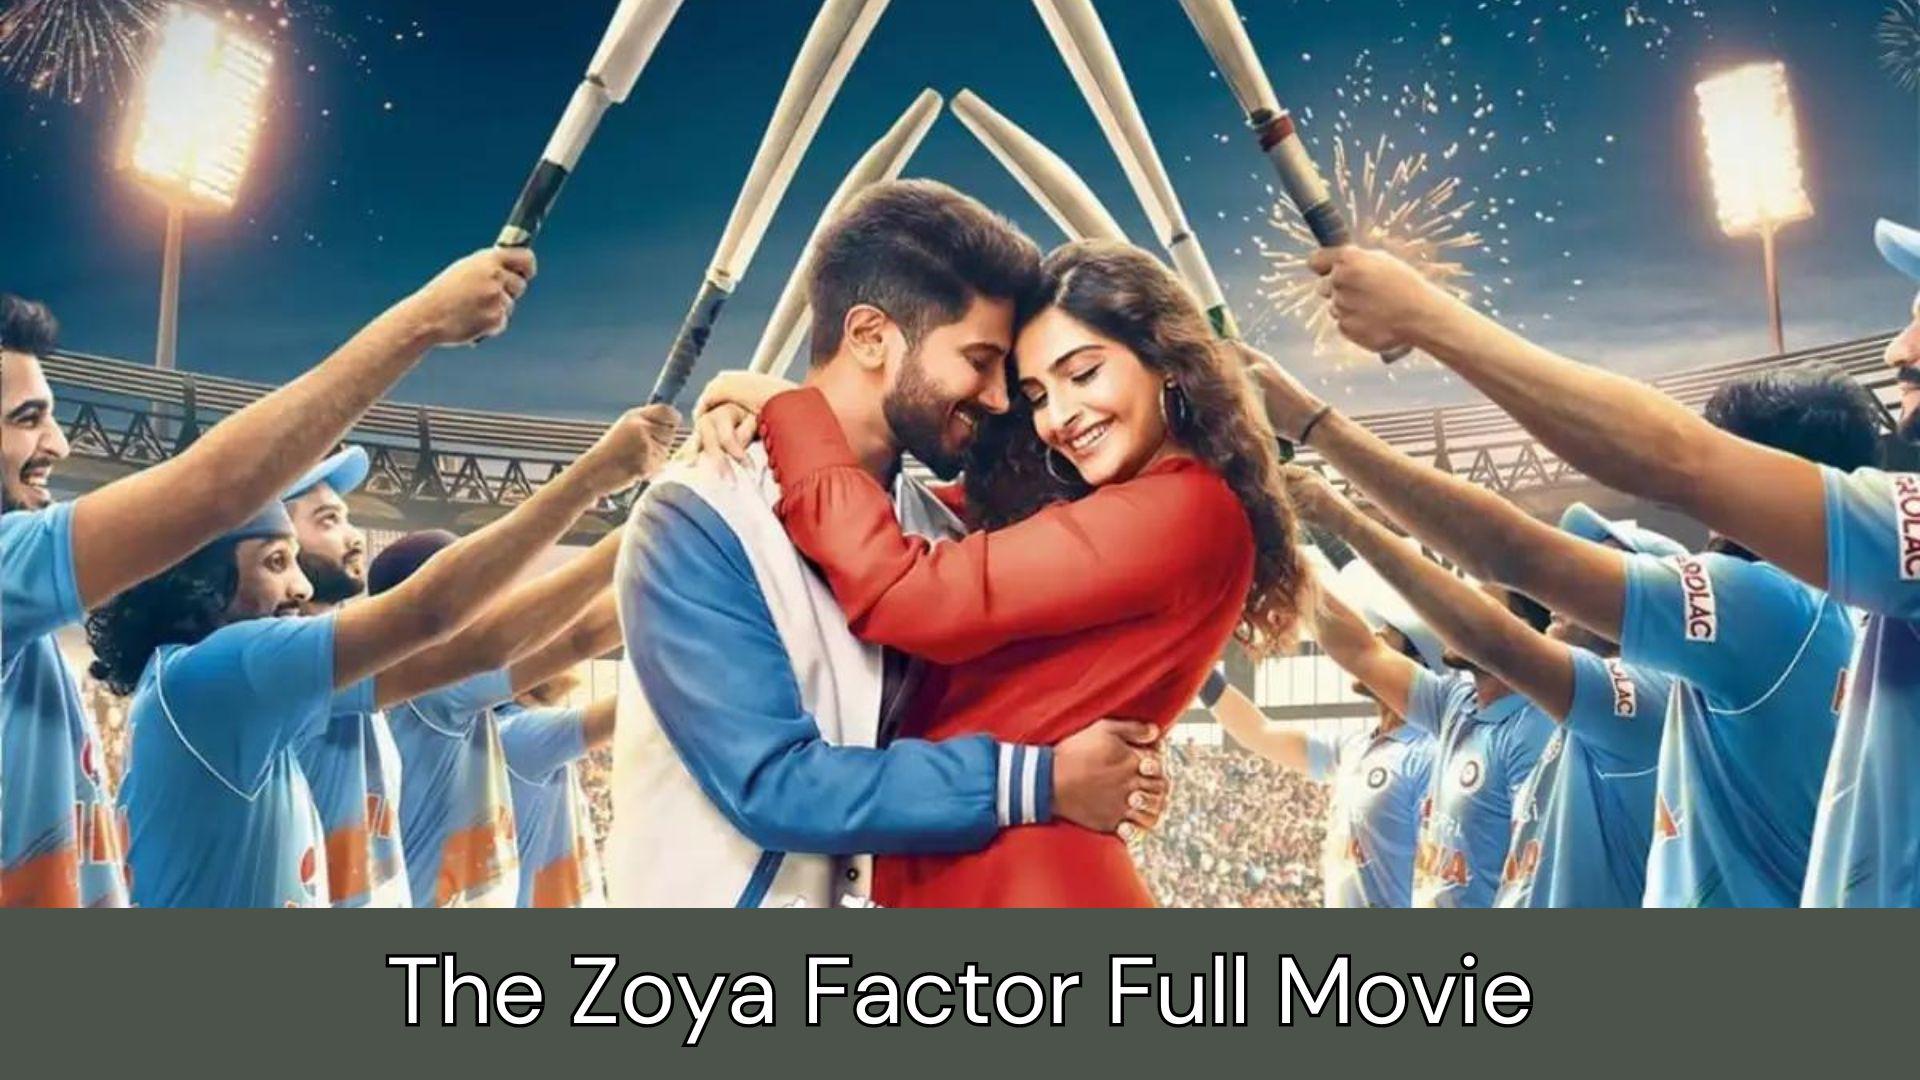 The Zoya Factor Full Movie Review, Cast, Producer